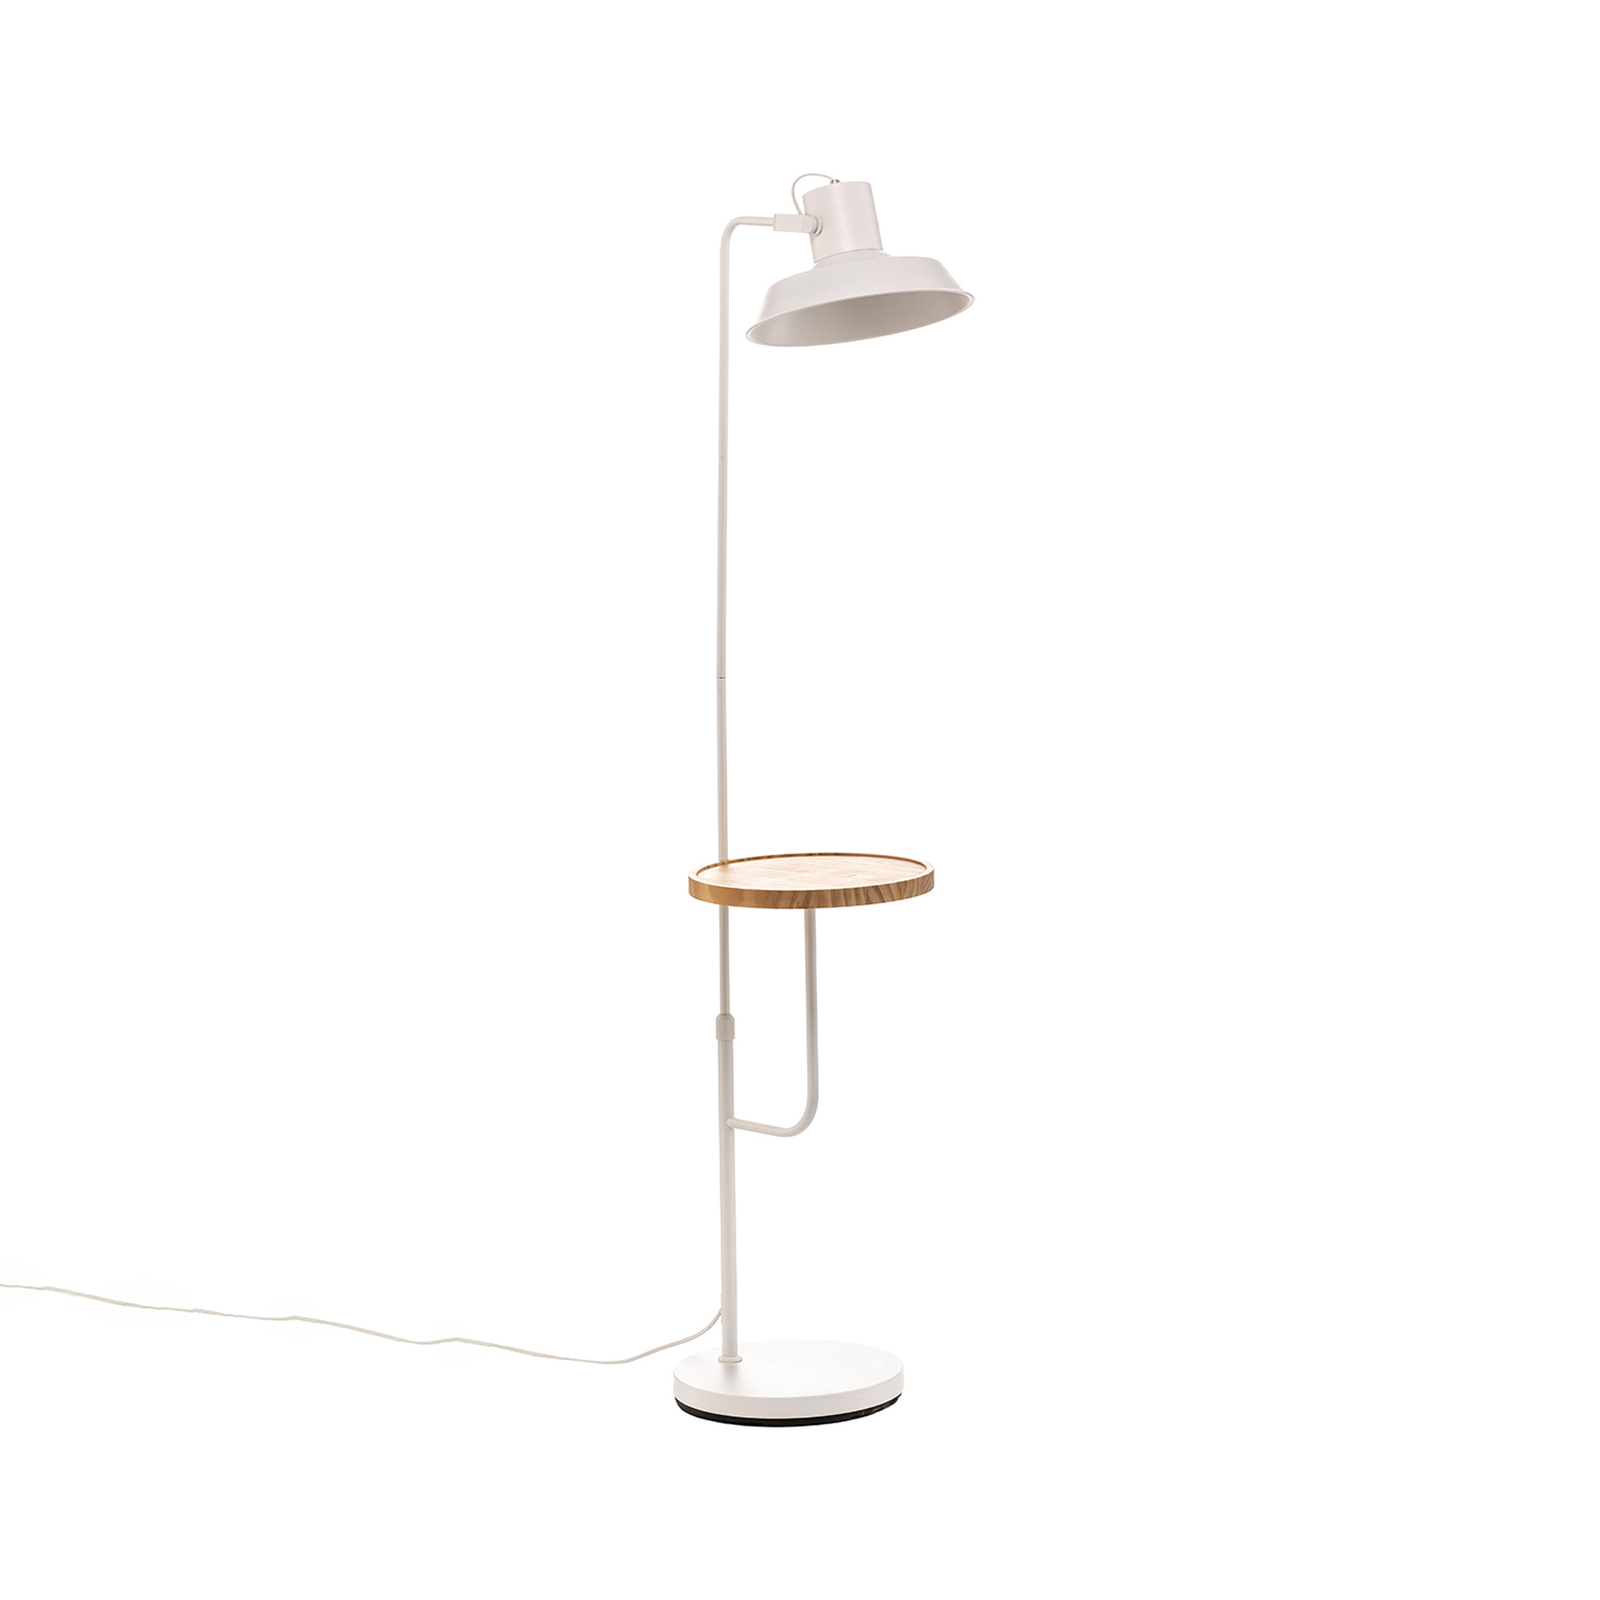 Lindby Berami floor lamp with a shelf, white